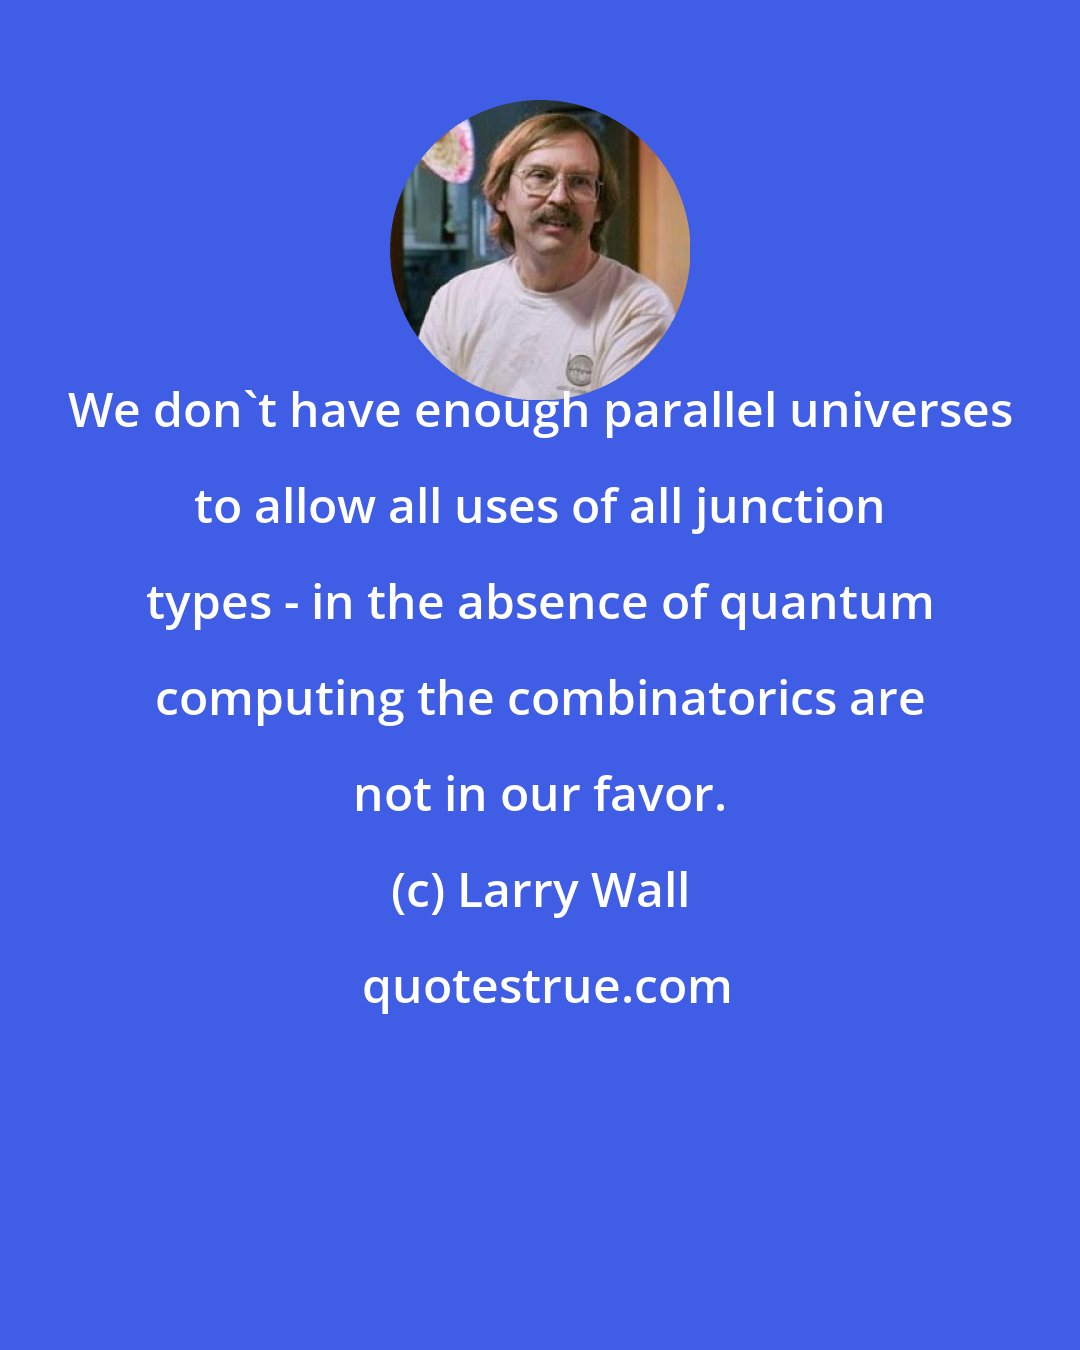 Larry Wall: We don't have enough parallel universes to allow all uses of all junction types - in the absence of quantum computing the combinatorics are not in our favor.